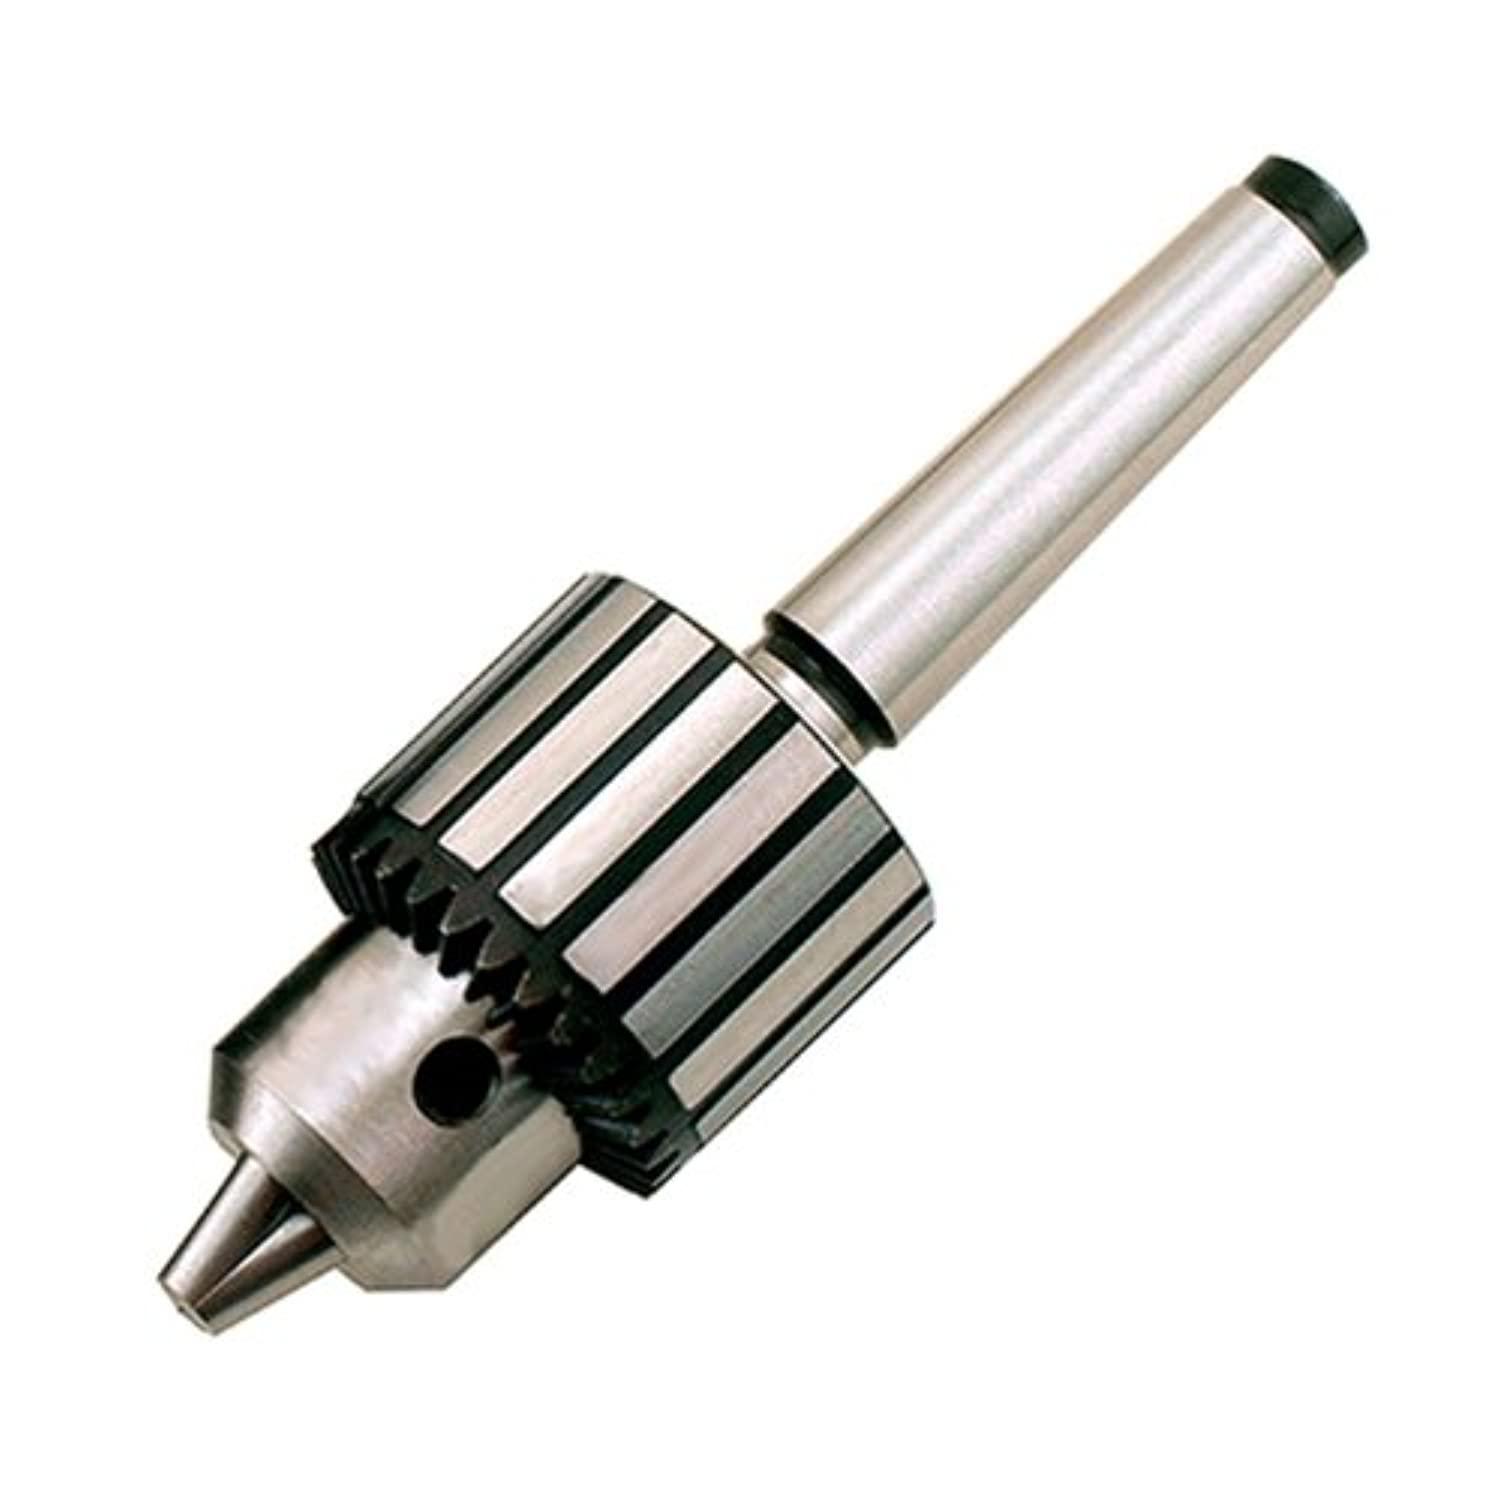 psi woodworking products tm32 1/2-inch drill chuck with #2 morse taper arbor (1/2" 2mt)